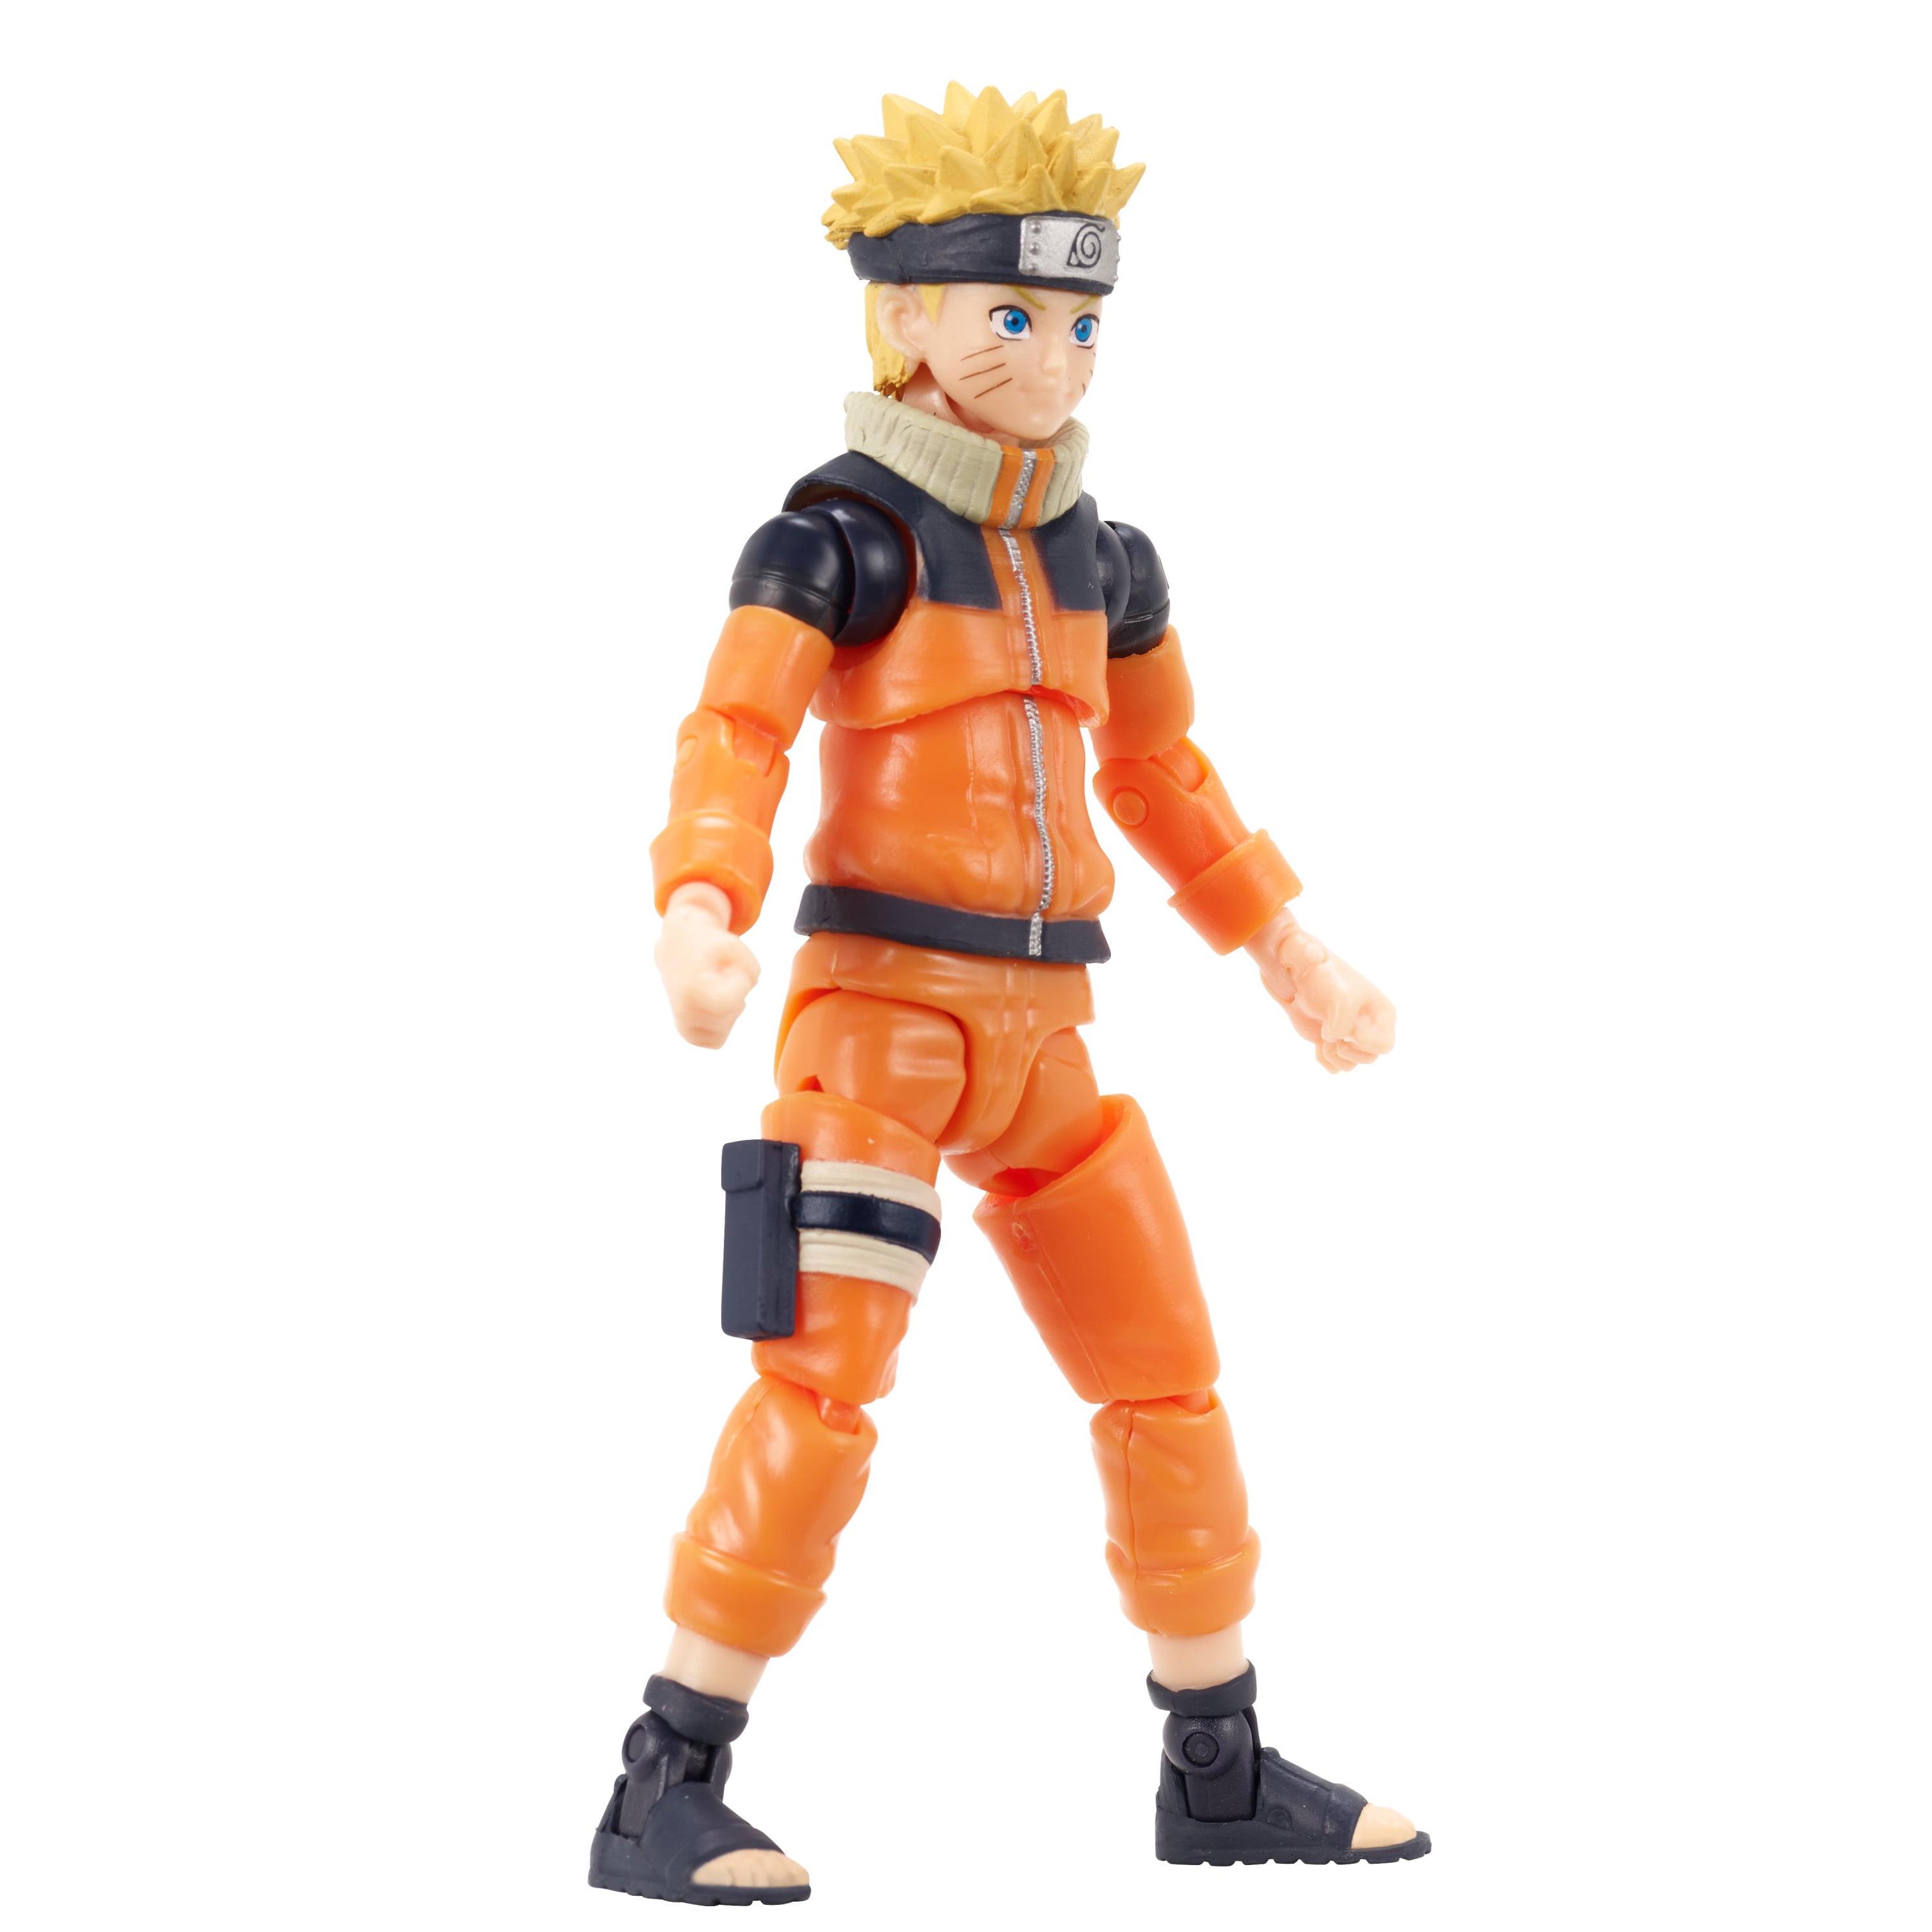 Buy MOTIONRUSH Bandai Anime Heroes Uzumaki Naruto Toy Action Figure Toy  Bundle with 2 My Outlet Mall Stickers Online at Low Prices in India -  Amazon.in